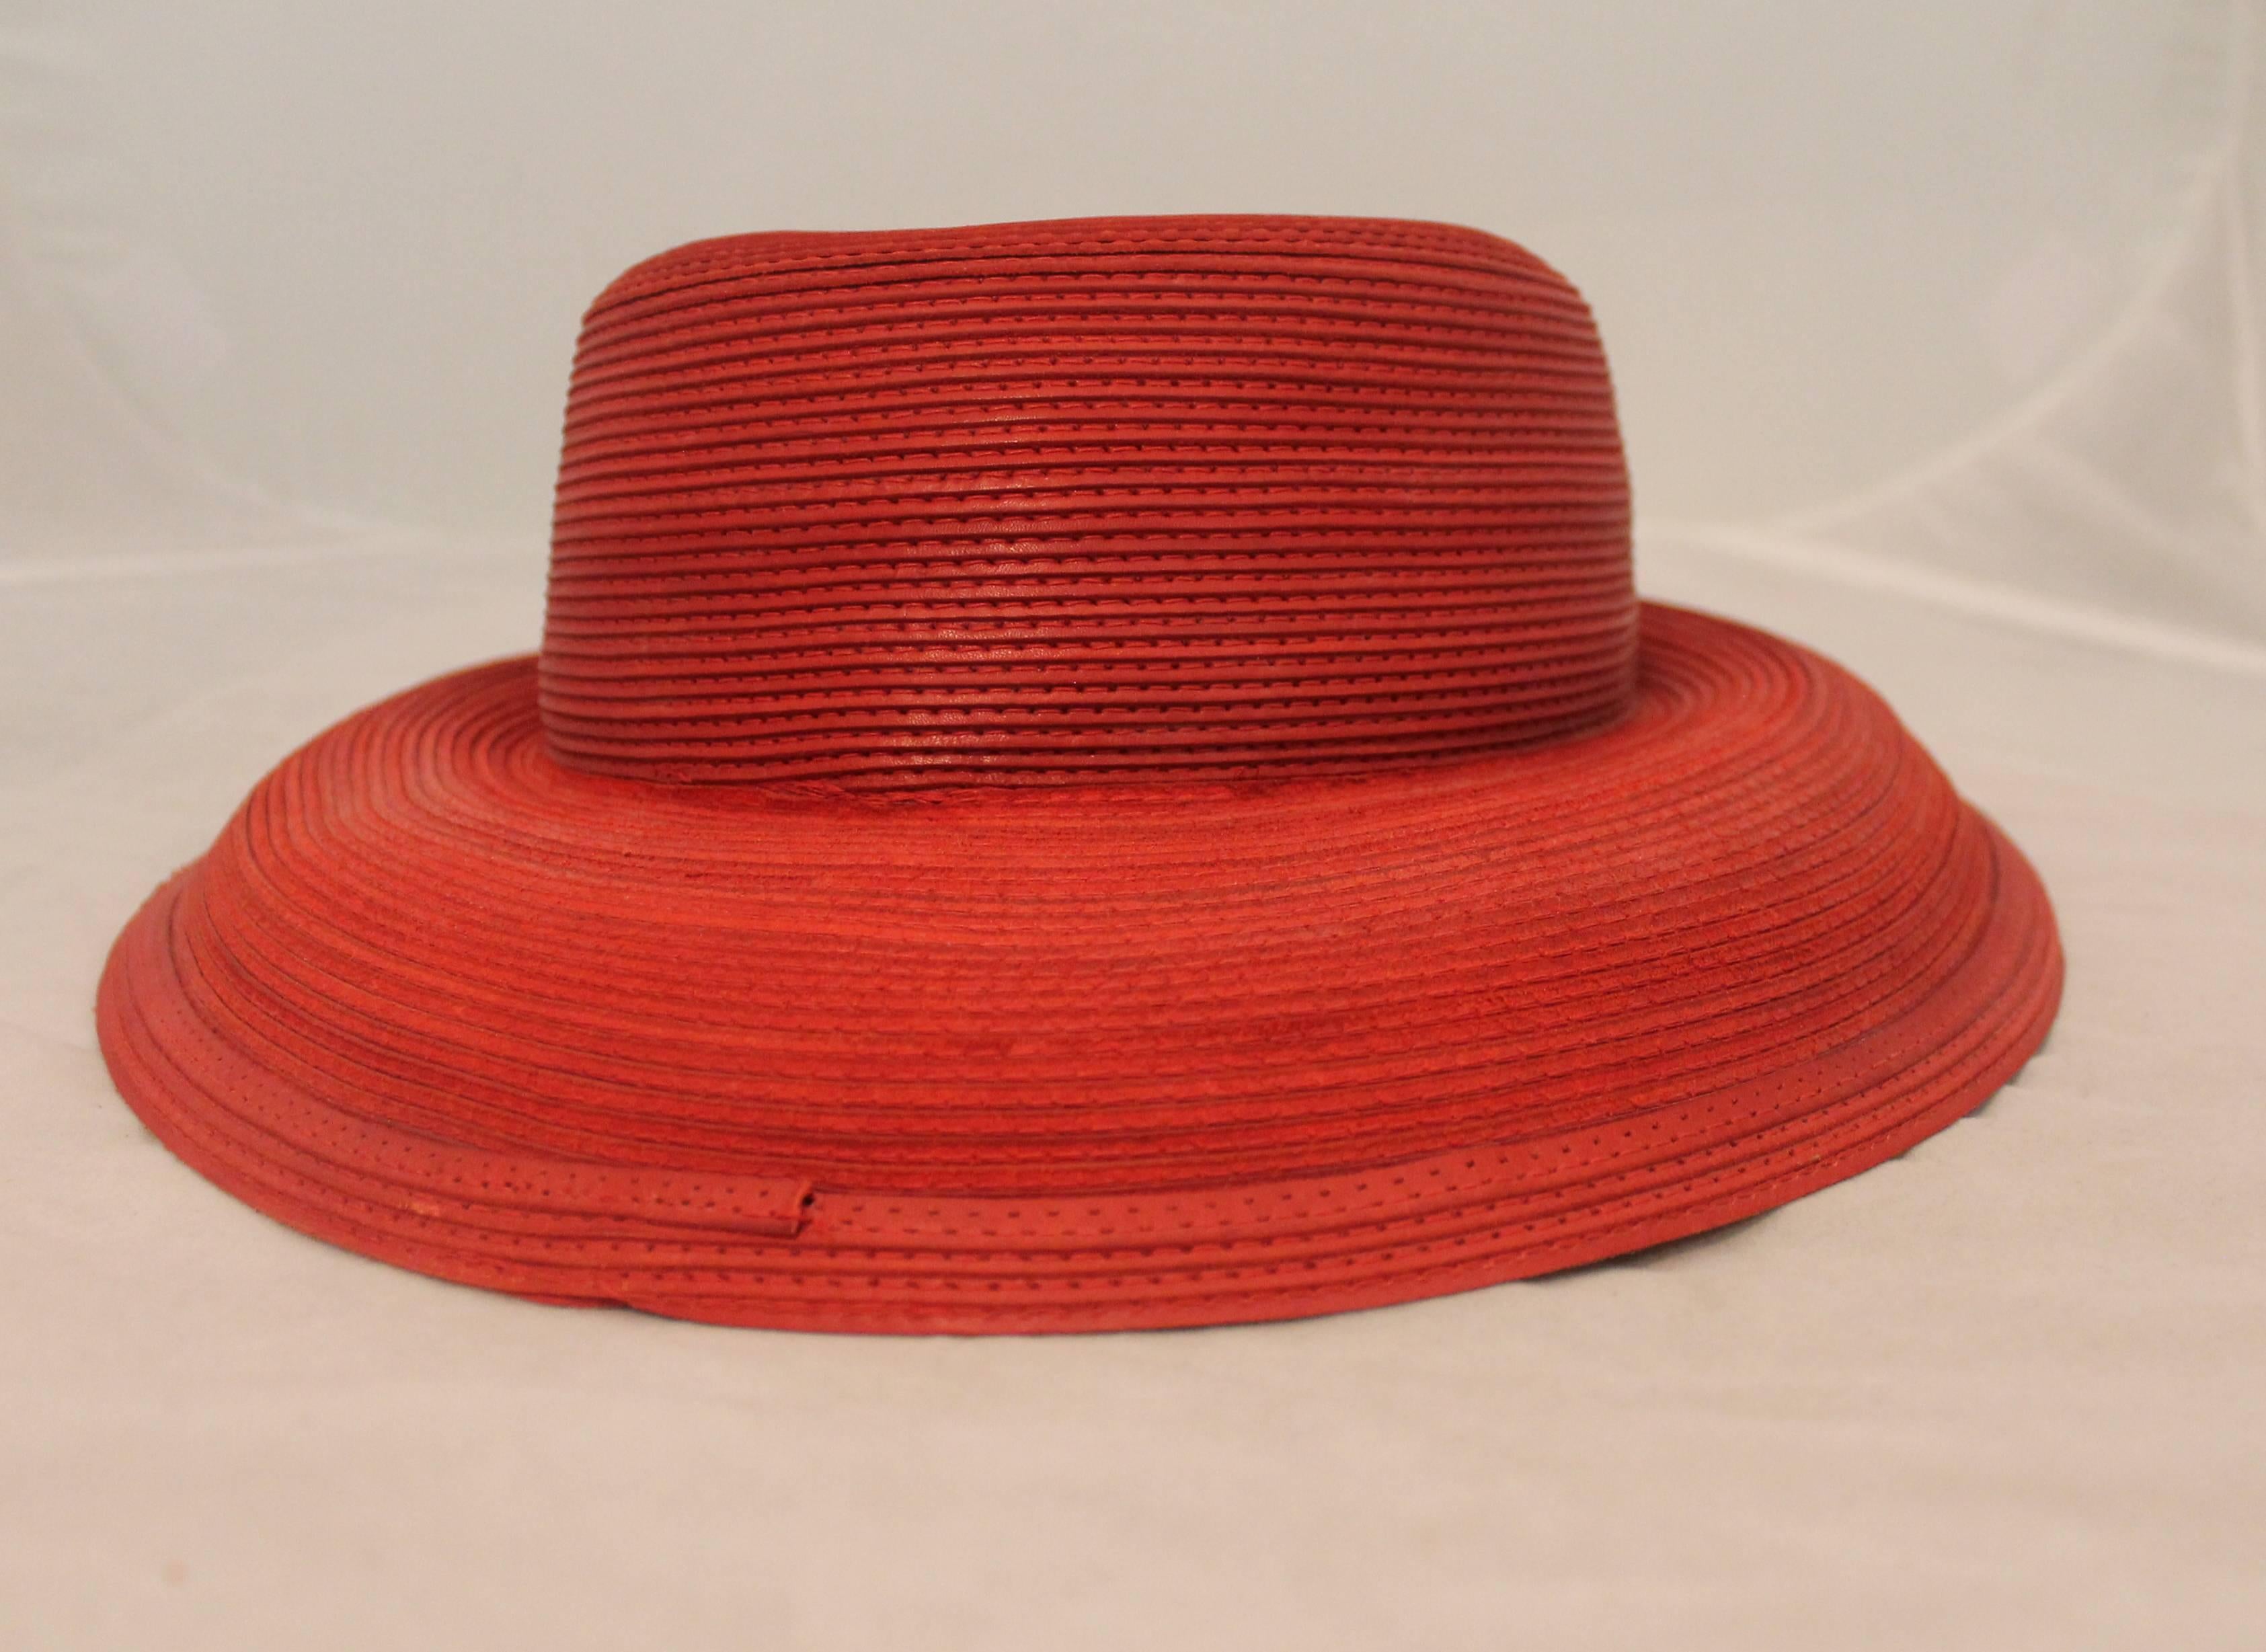 Patricia Underwood Vintage Red Leather Hat - circa 1990's. This hat is in excellent condition and has a pleated look all over. The brim of the hat can be flipped up or down for two different looks. 

Circumference: 21.5